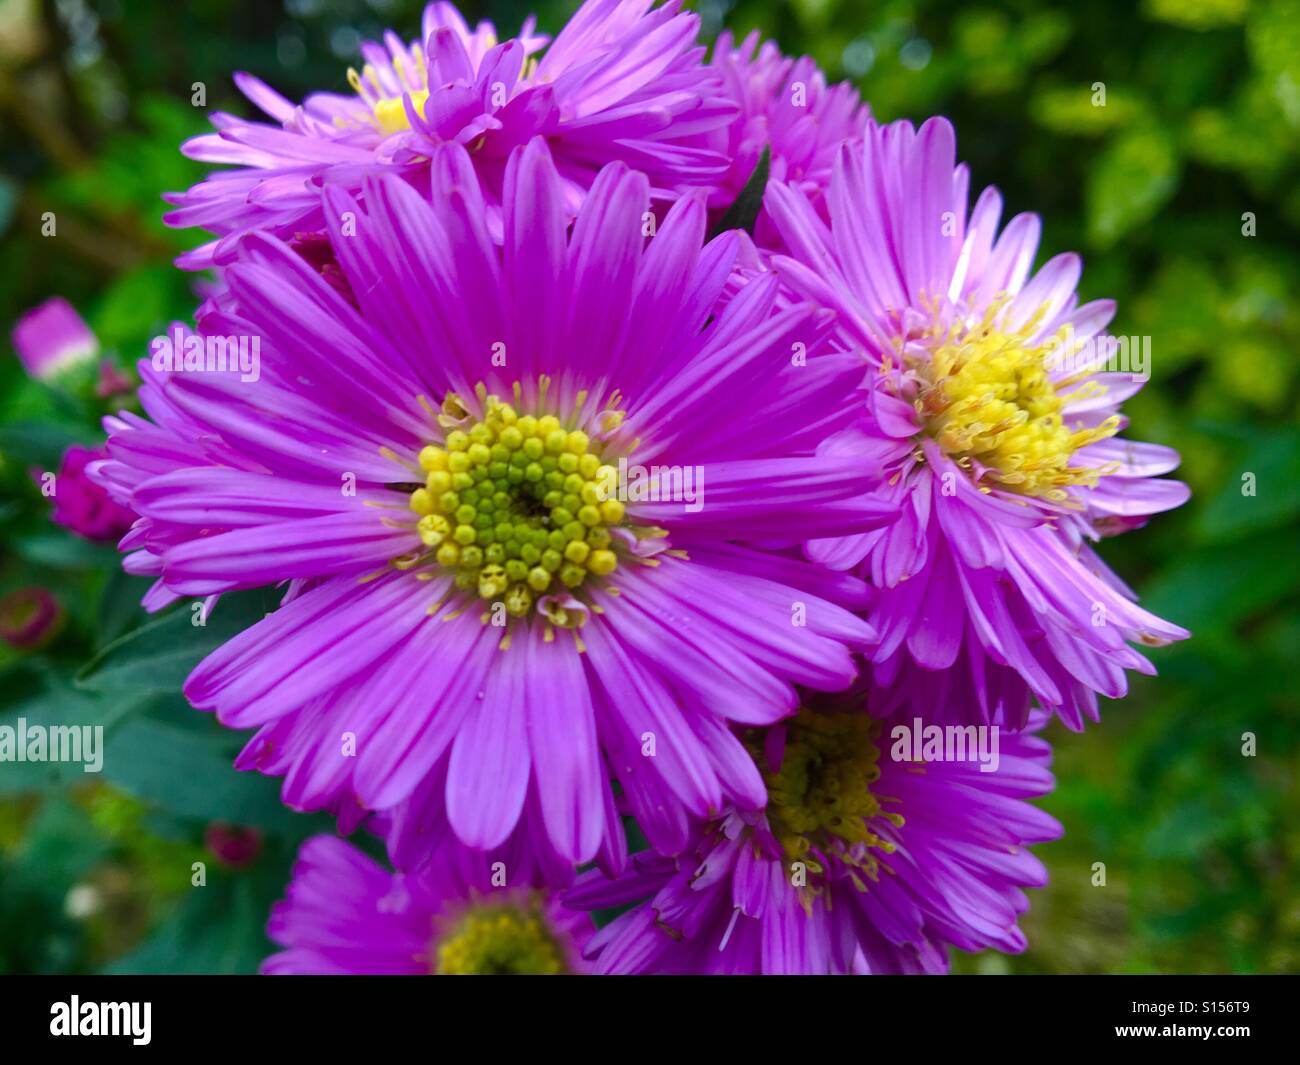 Patterns in Nature - Michaelmas daisy, Aster novi-belgii, flowers in autumn. Daisy like flowers which are lilac with a yellow centre Stock Photo